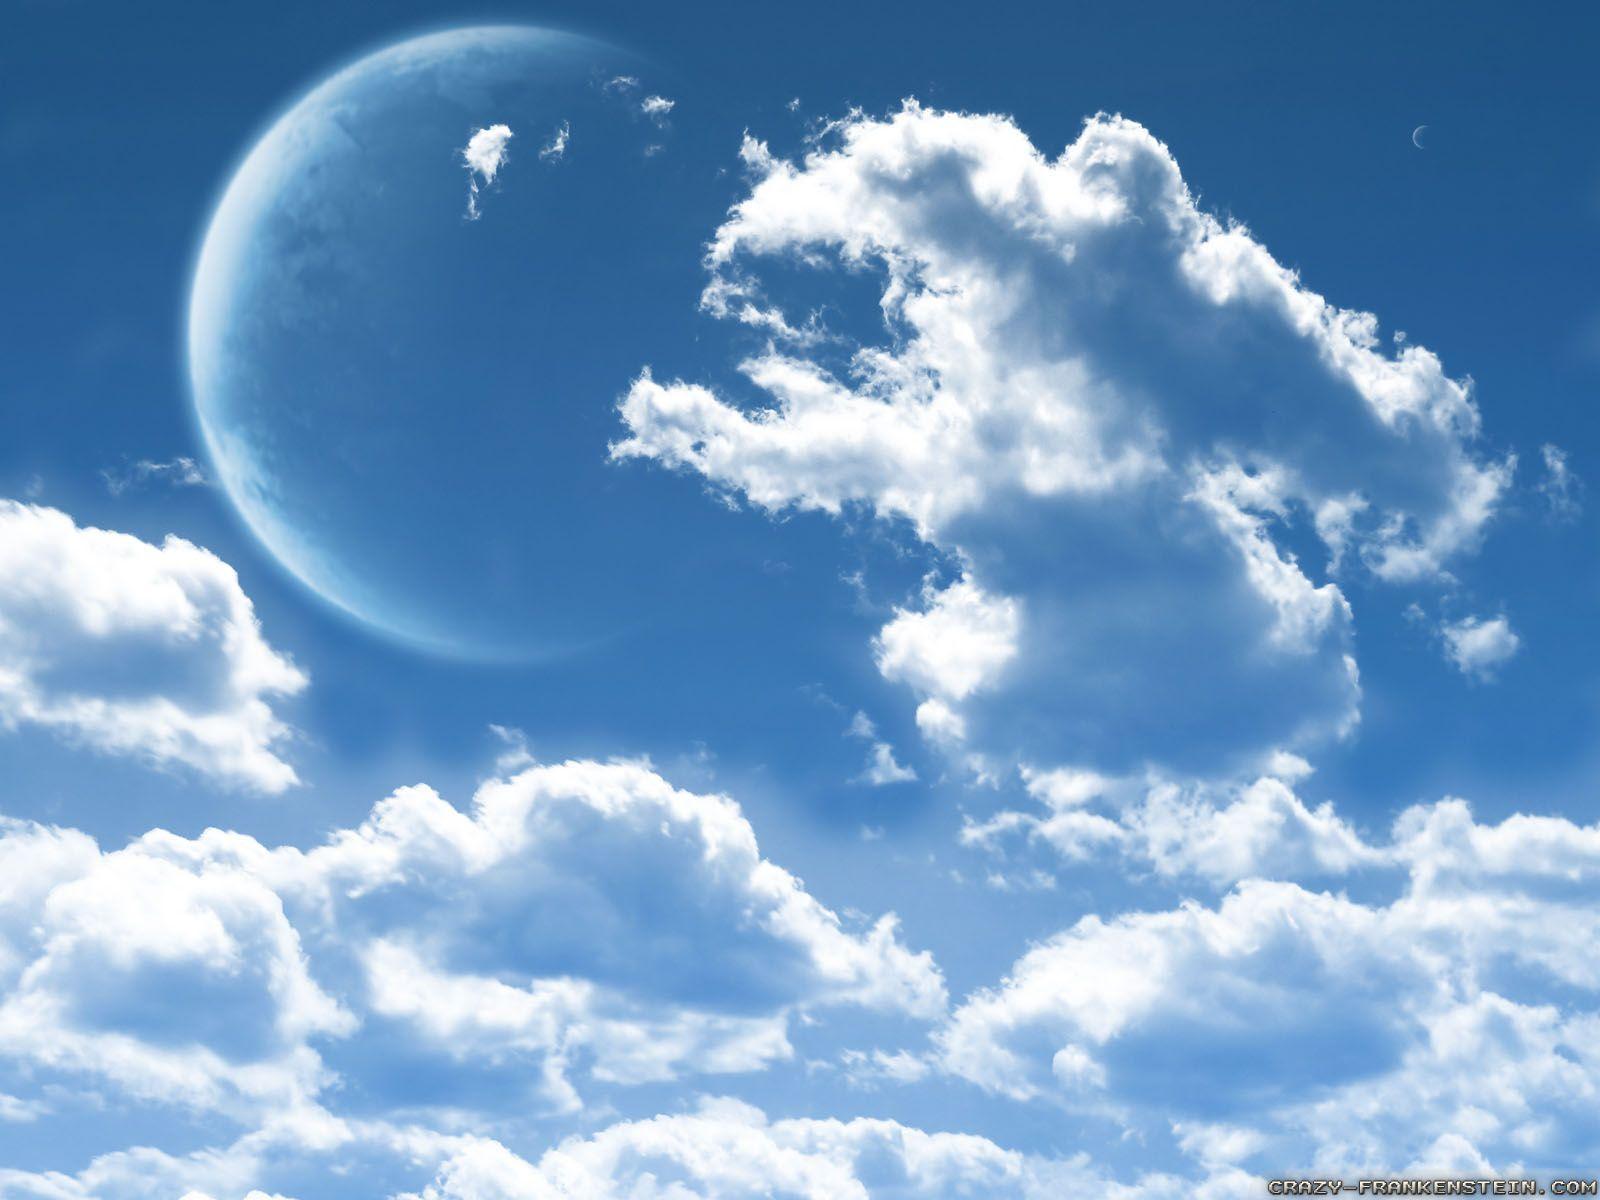 Blue Sky With Clouds Wallpapers - Wallpaper Cave